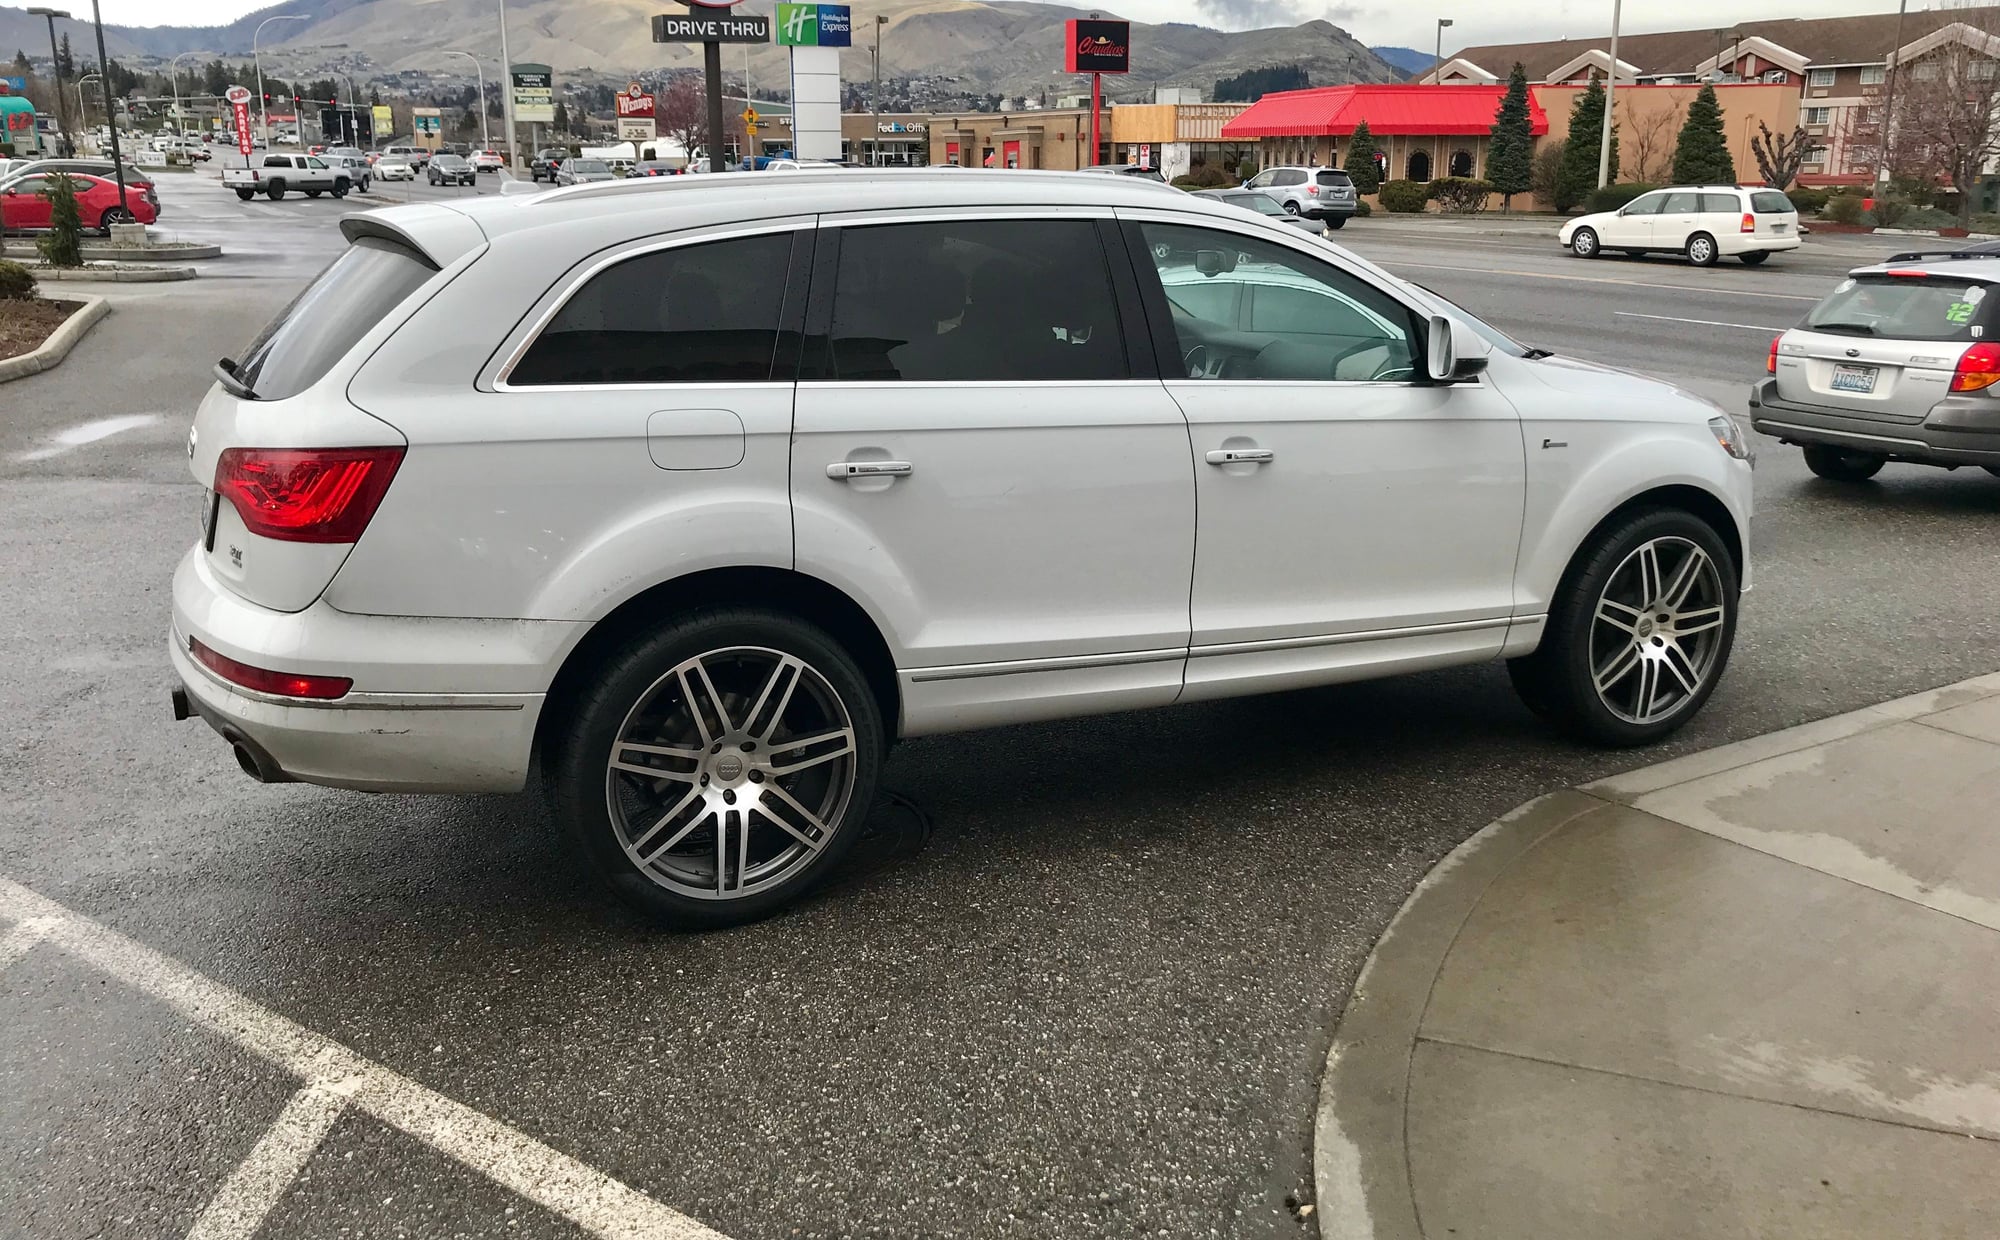 Wheels and Tires/Axles - Q7 22” RS4 style wheels - Used - 2006 to 2015 Audi Q7 - Leavenworth, WA 98826, United States